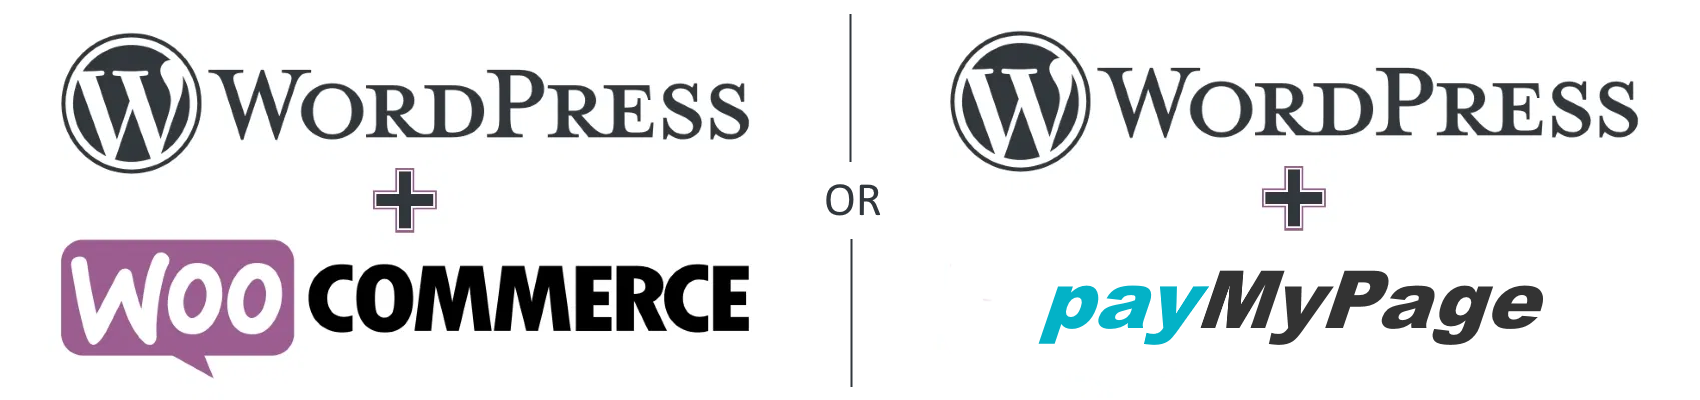 add online payments to wordpress woocommerce pmp